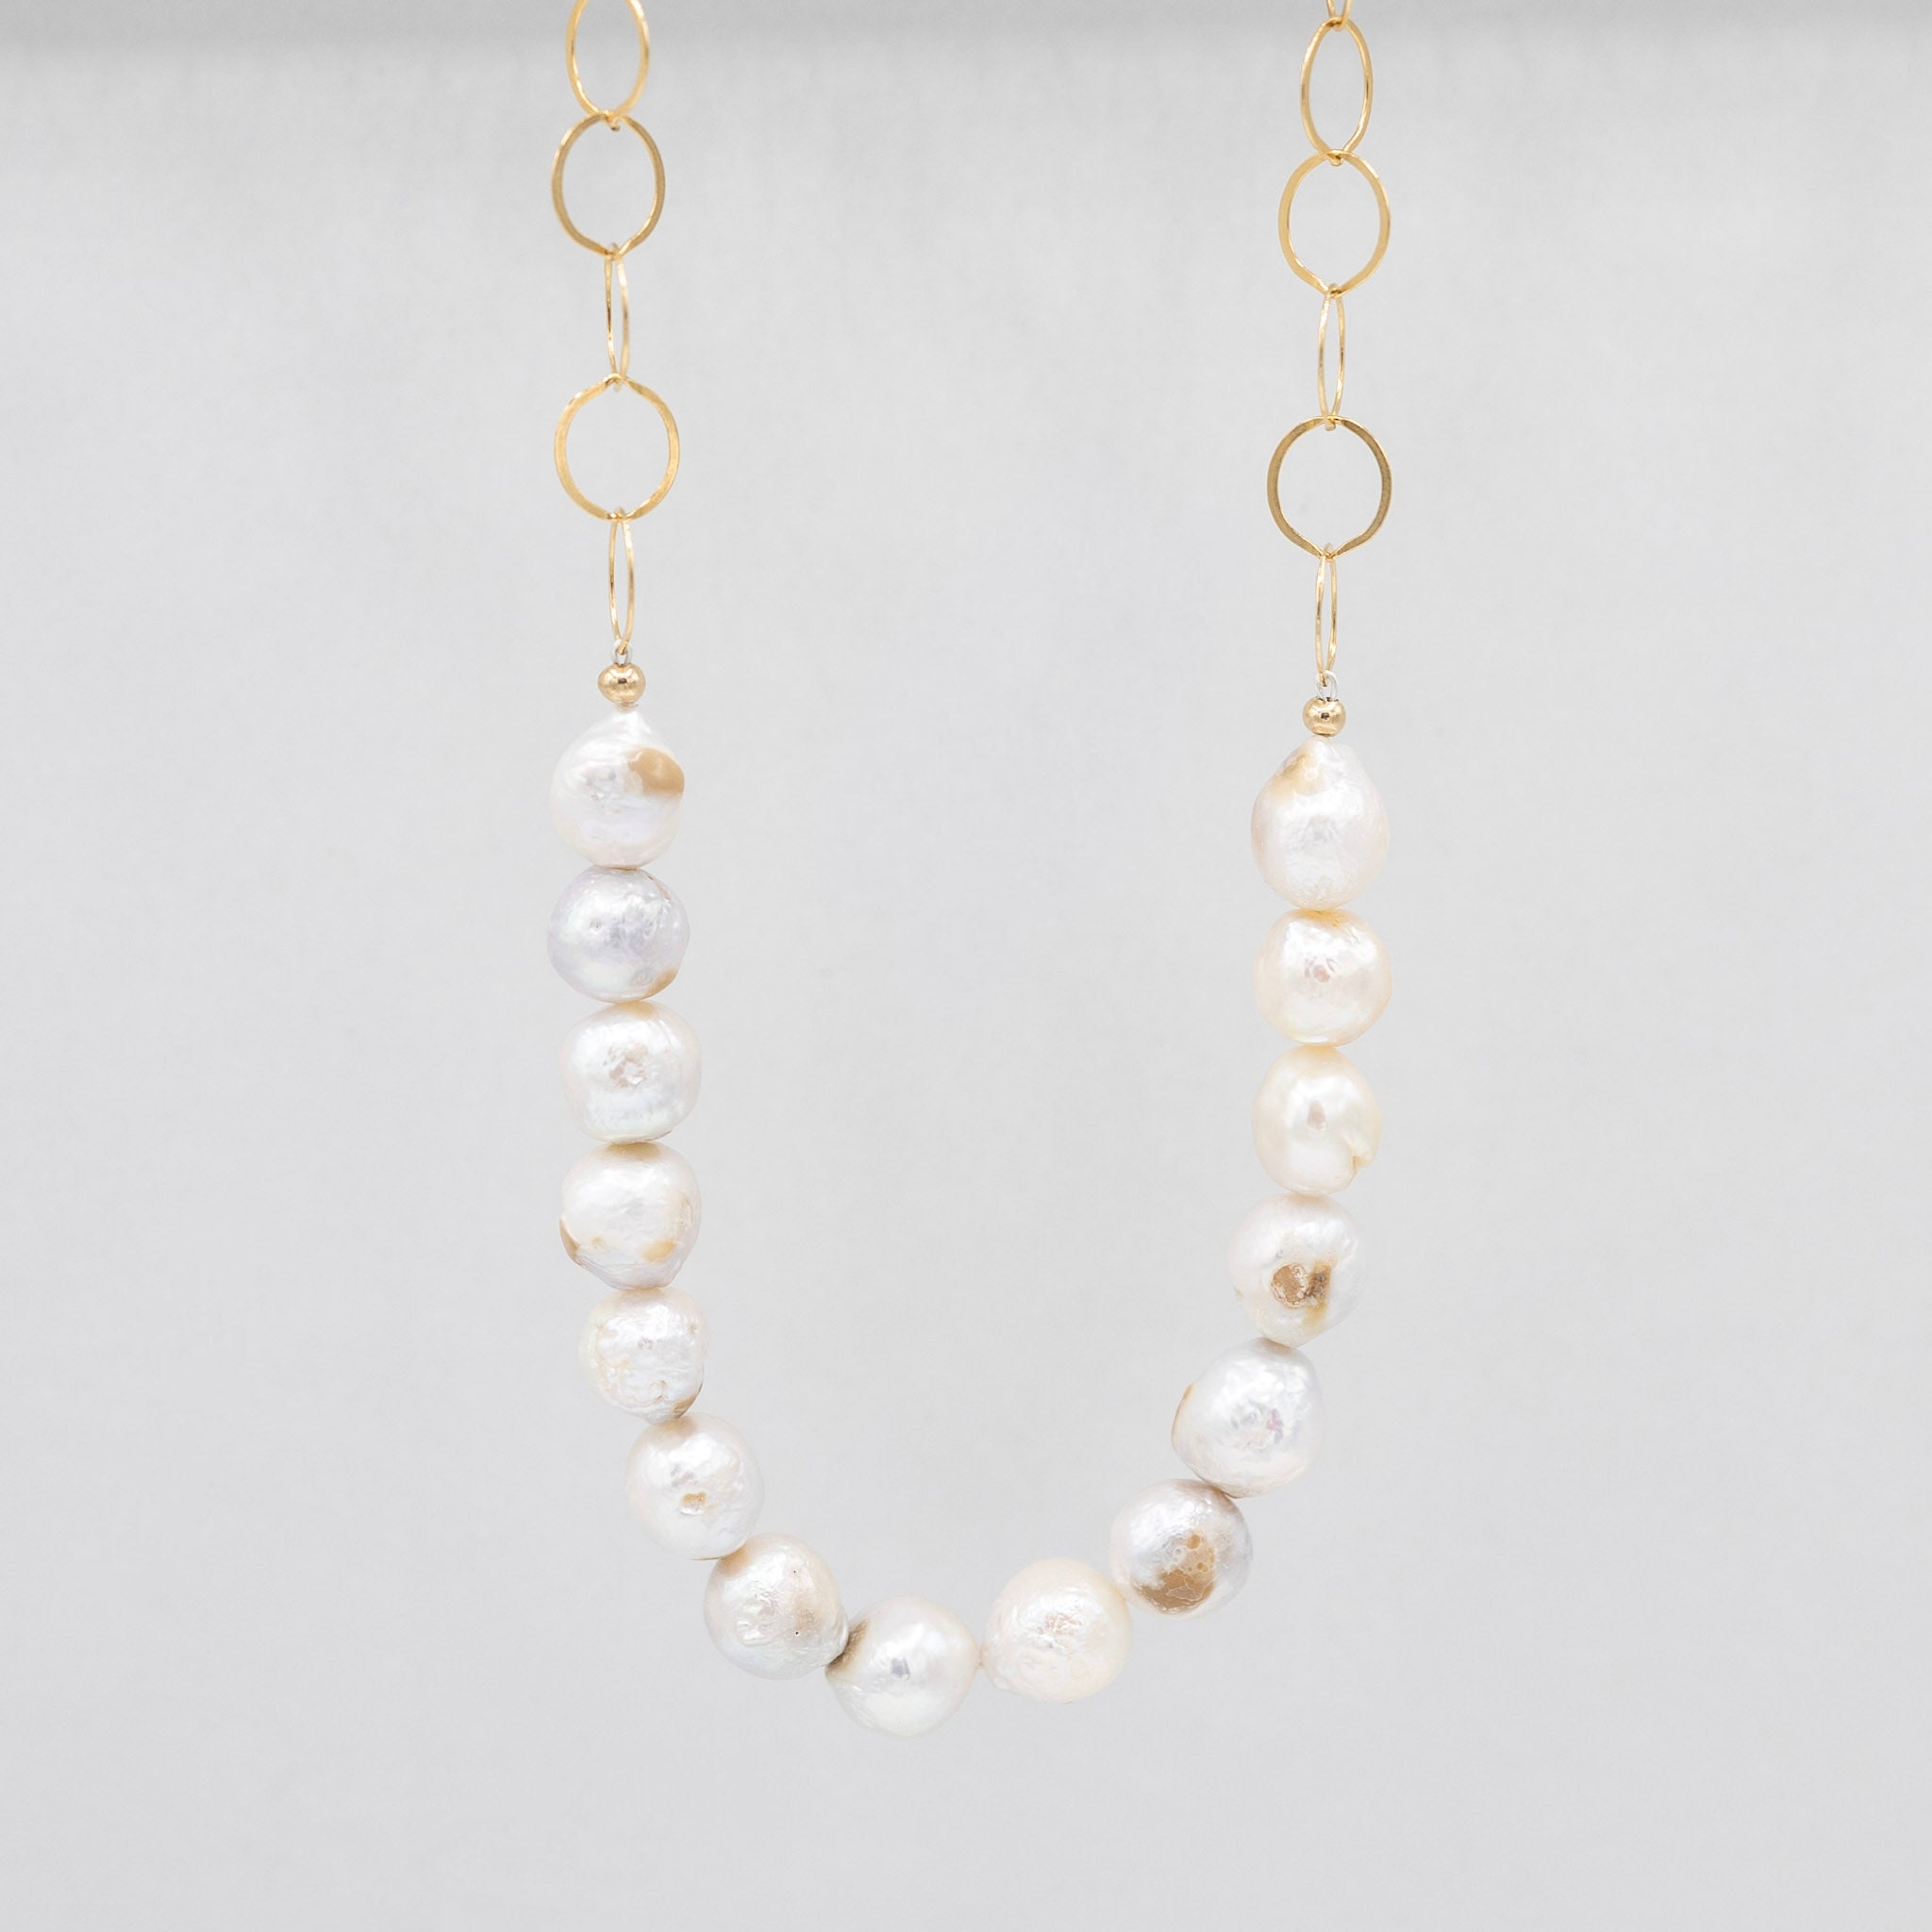 10mm Baroque Pearls & Chain Necklace